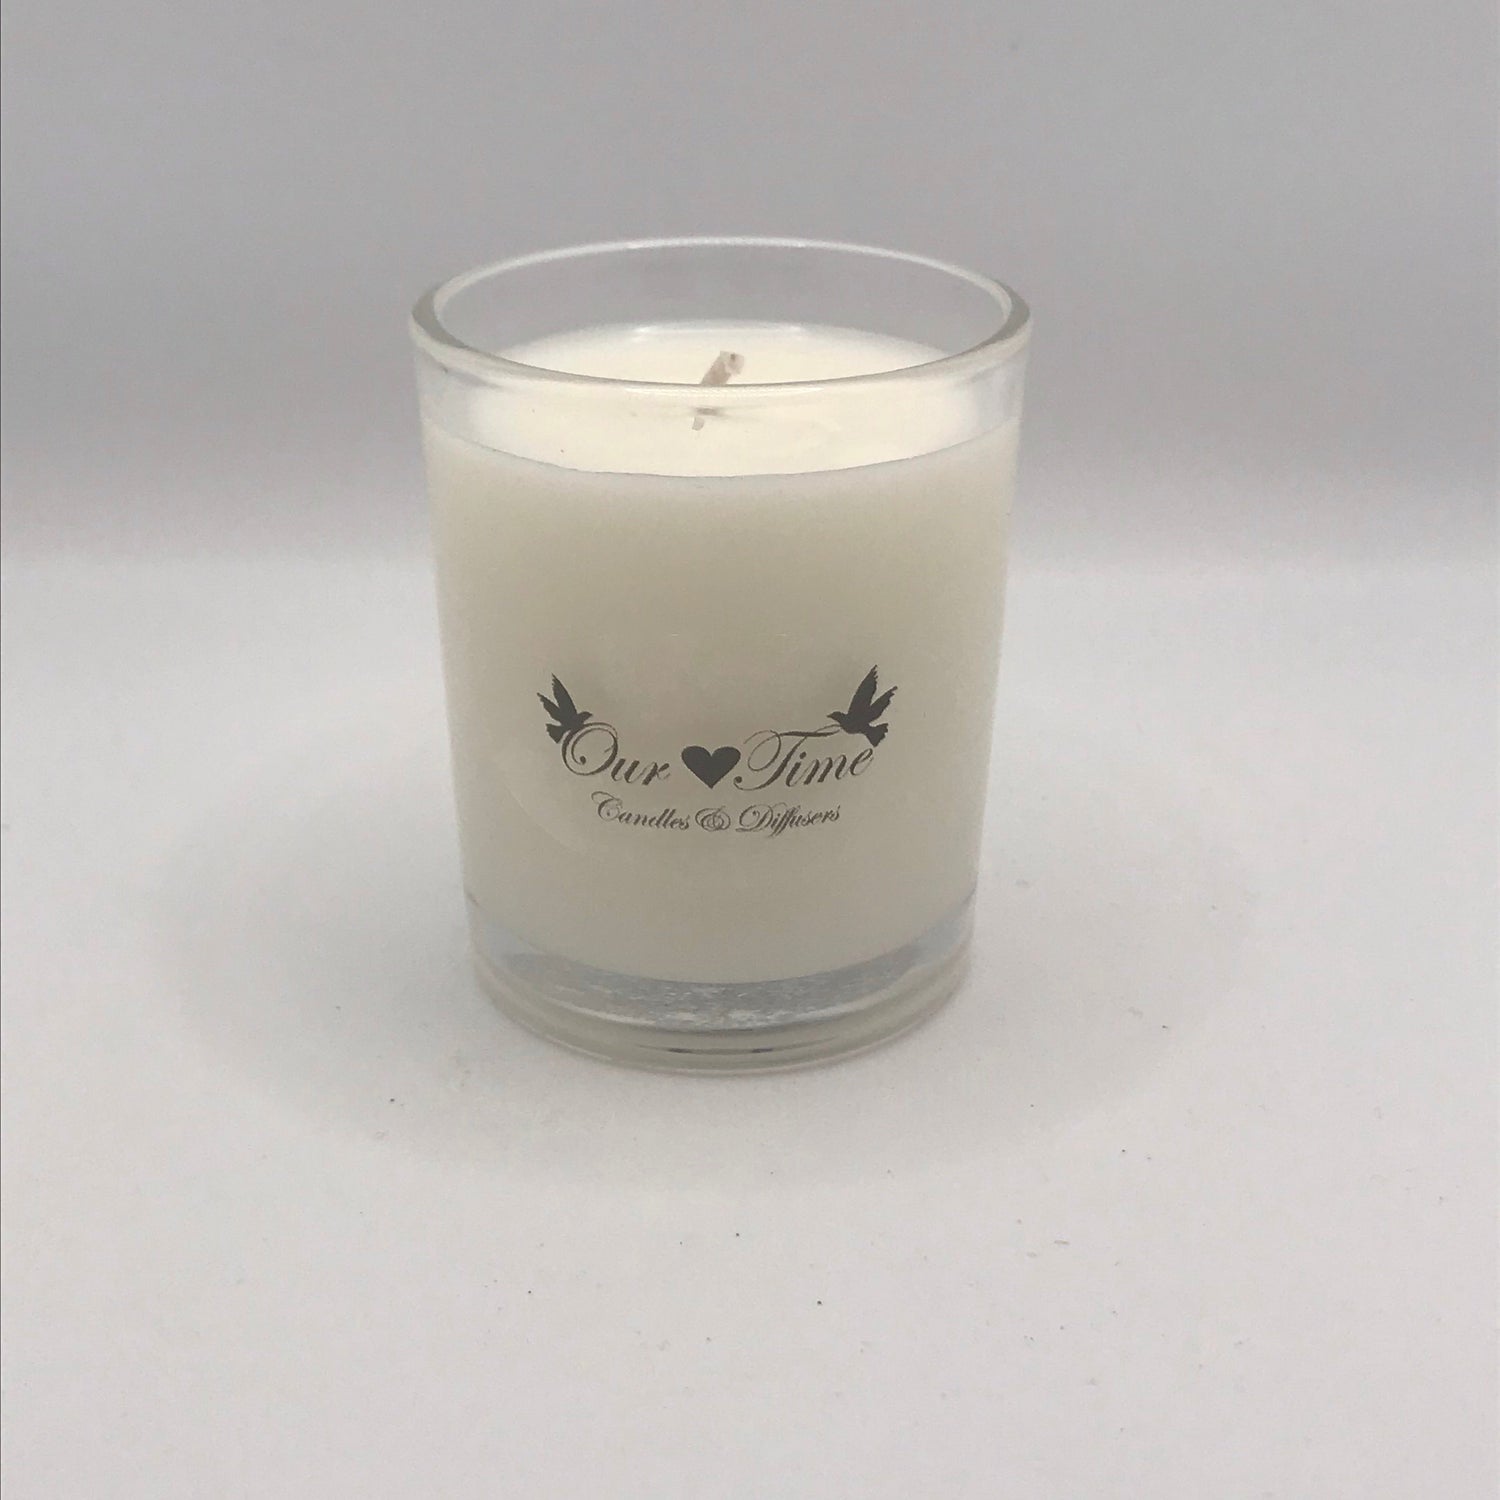 Small Wax Filled Candle from Our Time Candles and Diffusers